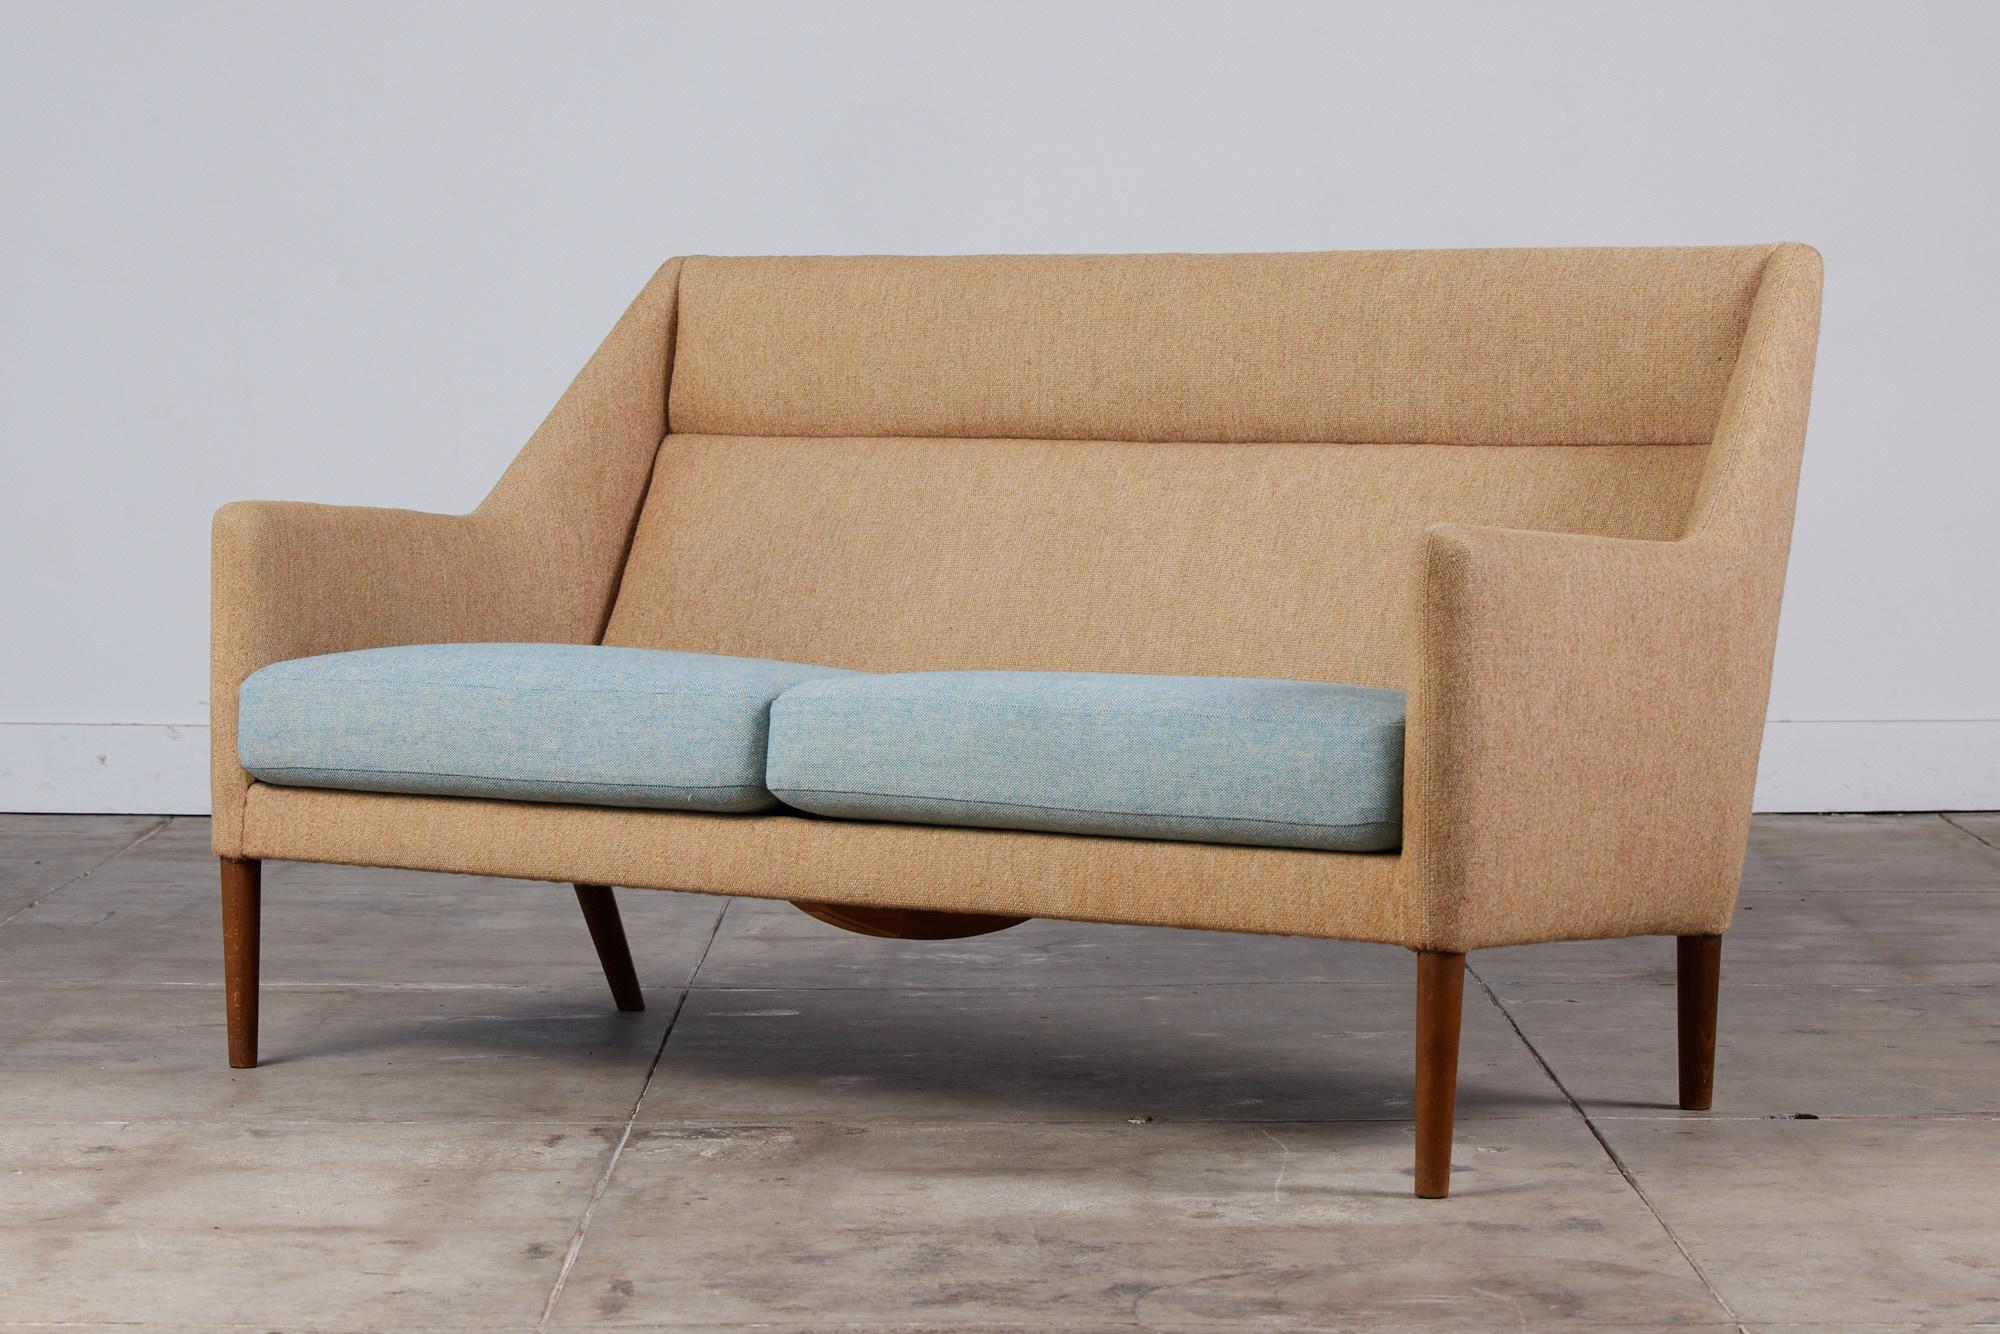 A generous, two-seat sofa designed by Ejner Larsen & Axel Bender Madsen for Fritz Hansen c.1950s, Denmark. The sofa has an elongated wingback chair feeling with its high armrests. The 